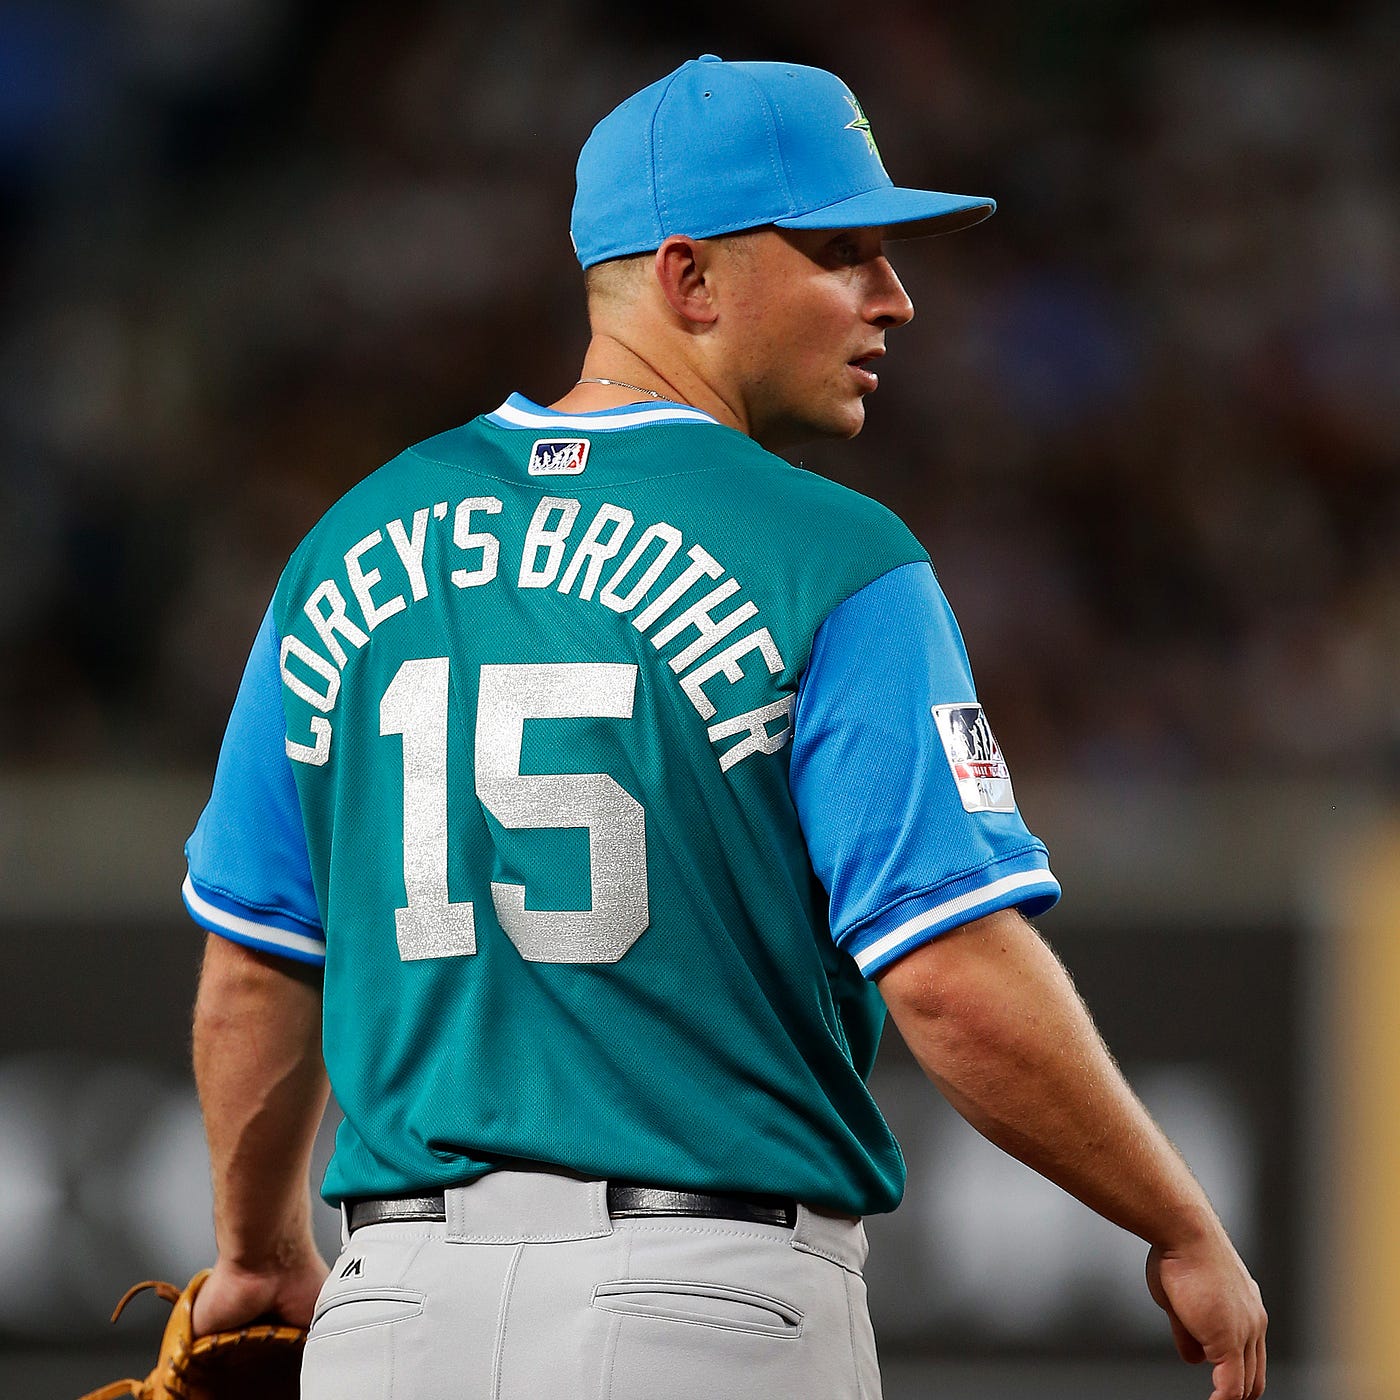 Mariners Mondays — Players Weekend, by Mariners PR